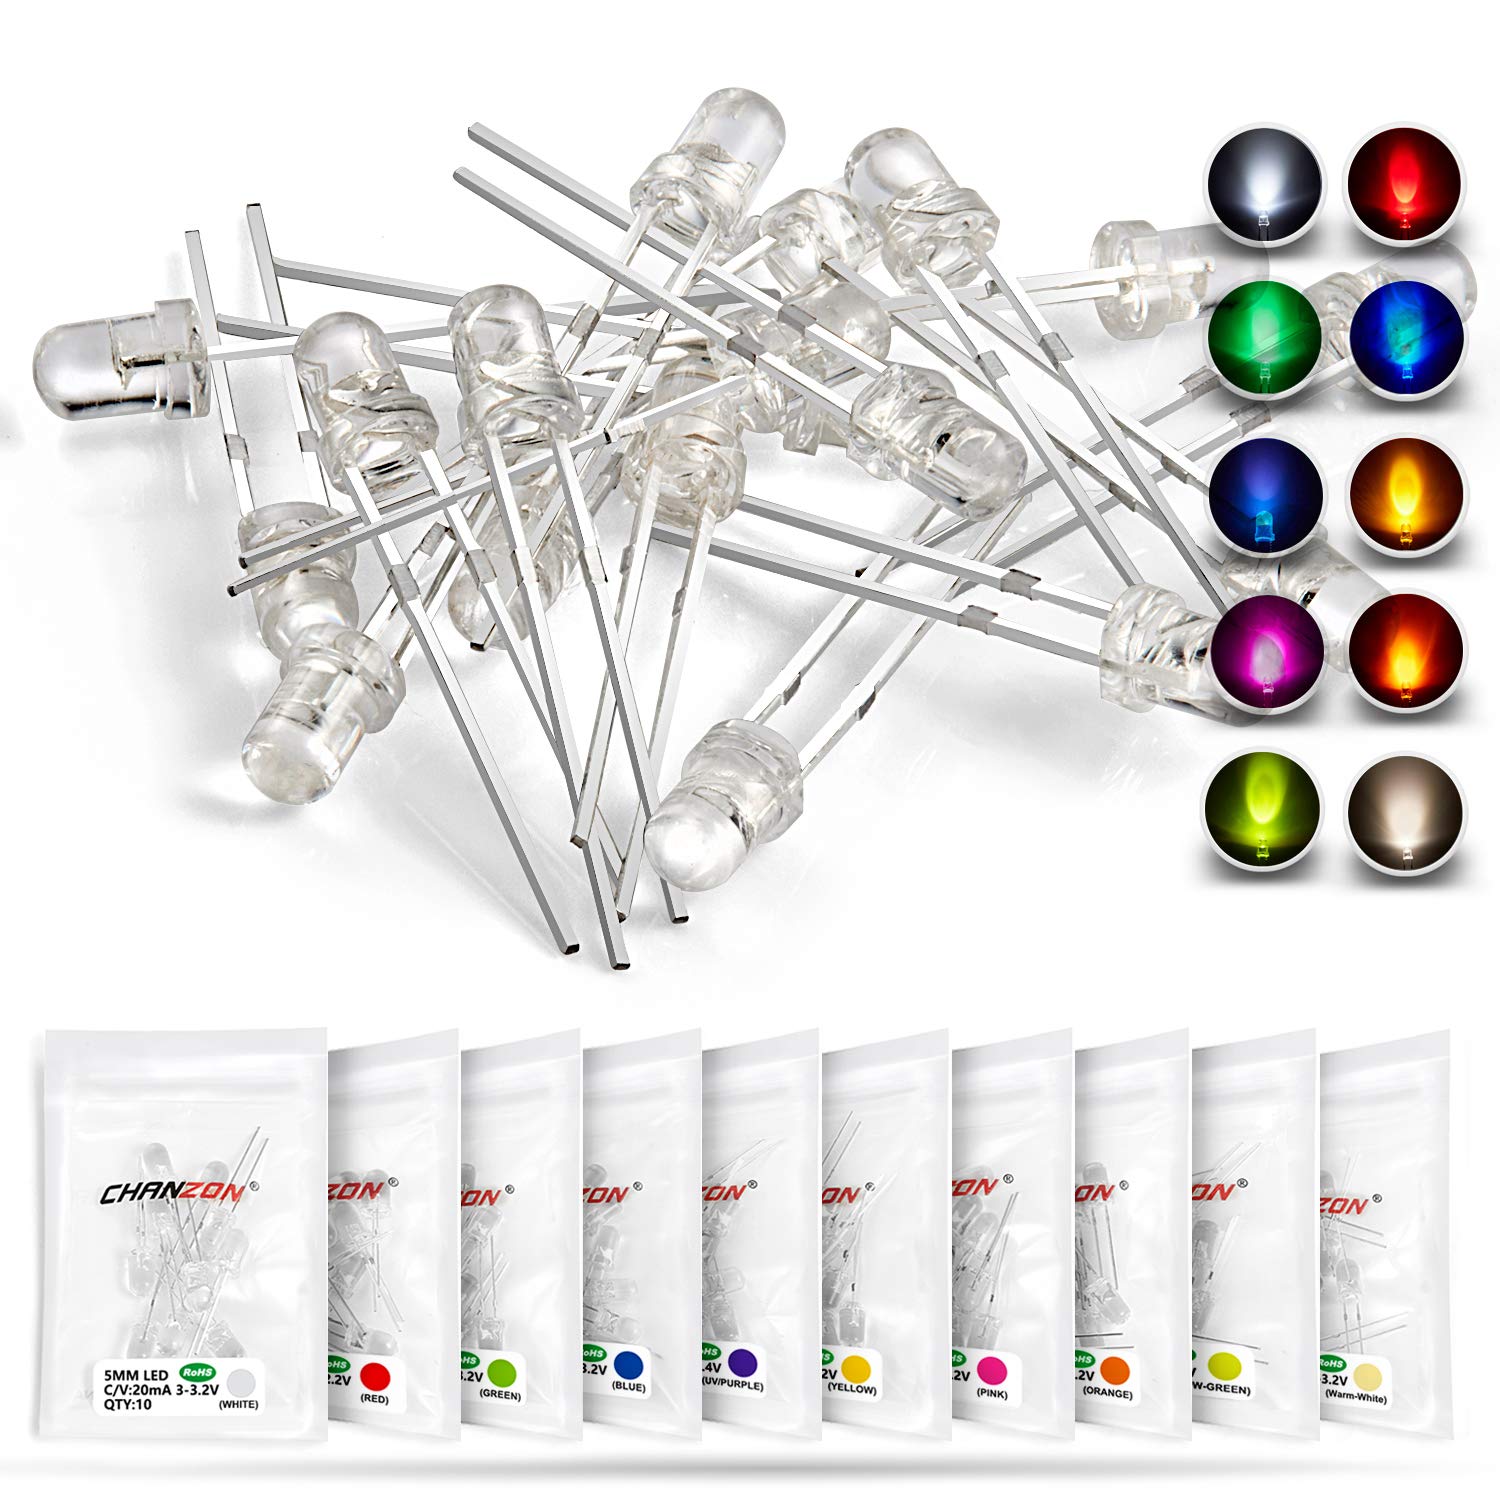 Book Cover Chanzon 100pcs (10 Colors x 10pcs) 3mm LED Diode Lights Assortment (Clear Transparent Lens) Emitting Lighting Bulb Lamp Assorted Kit Variety Colour Warm White Red Yellow Green Blue Orange UV Pink A) 10 Colors X 10pcs = 100pcs